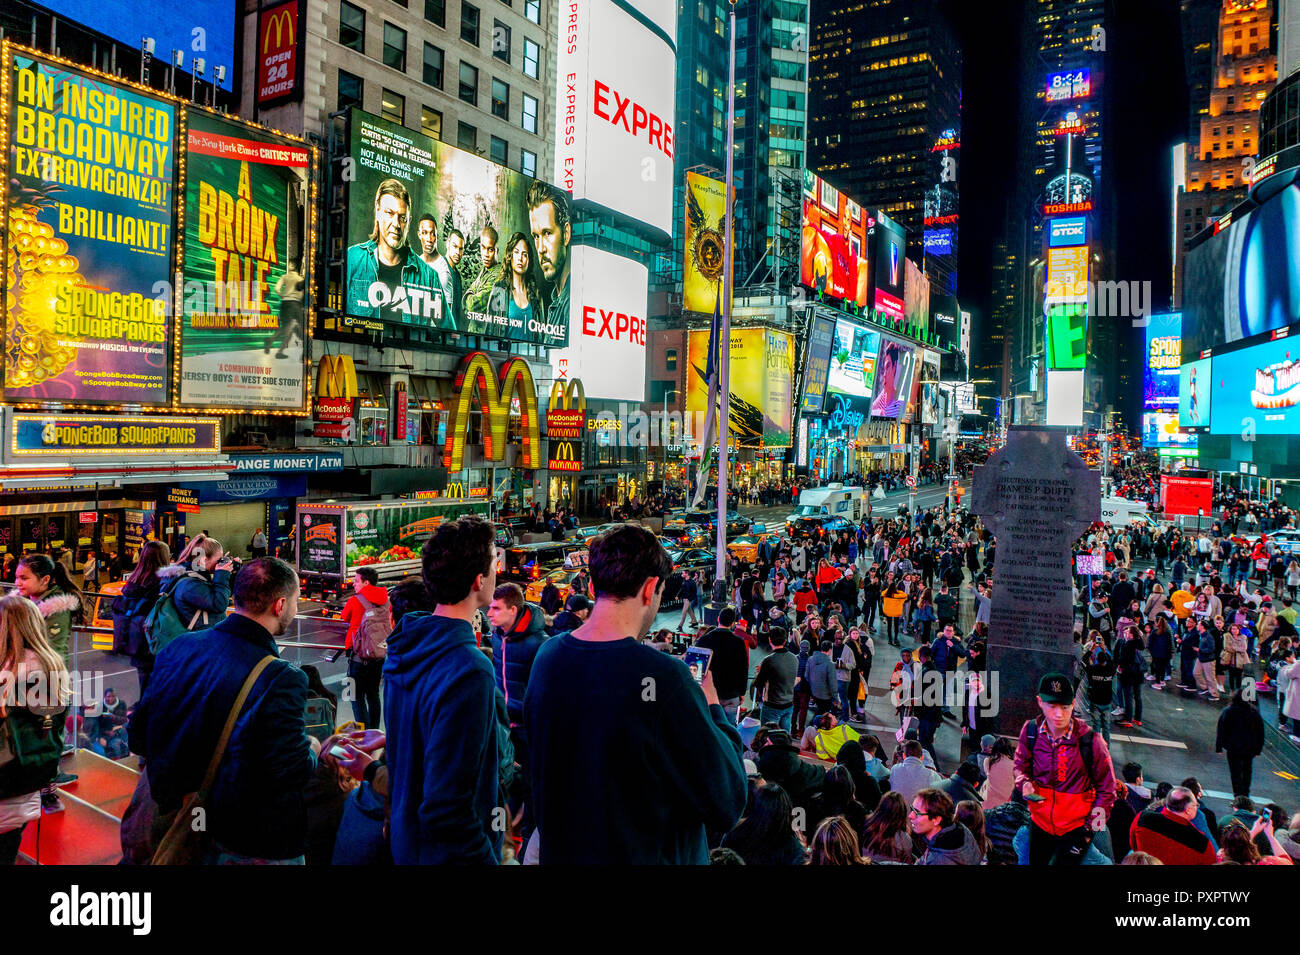 New York, NY / USA - 04.12.2018 Times Square is an iconic busy intersection of neon art and commerce is always crowded at night Stock Photo